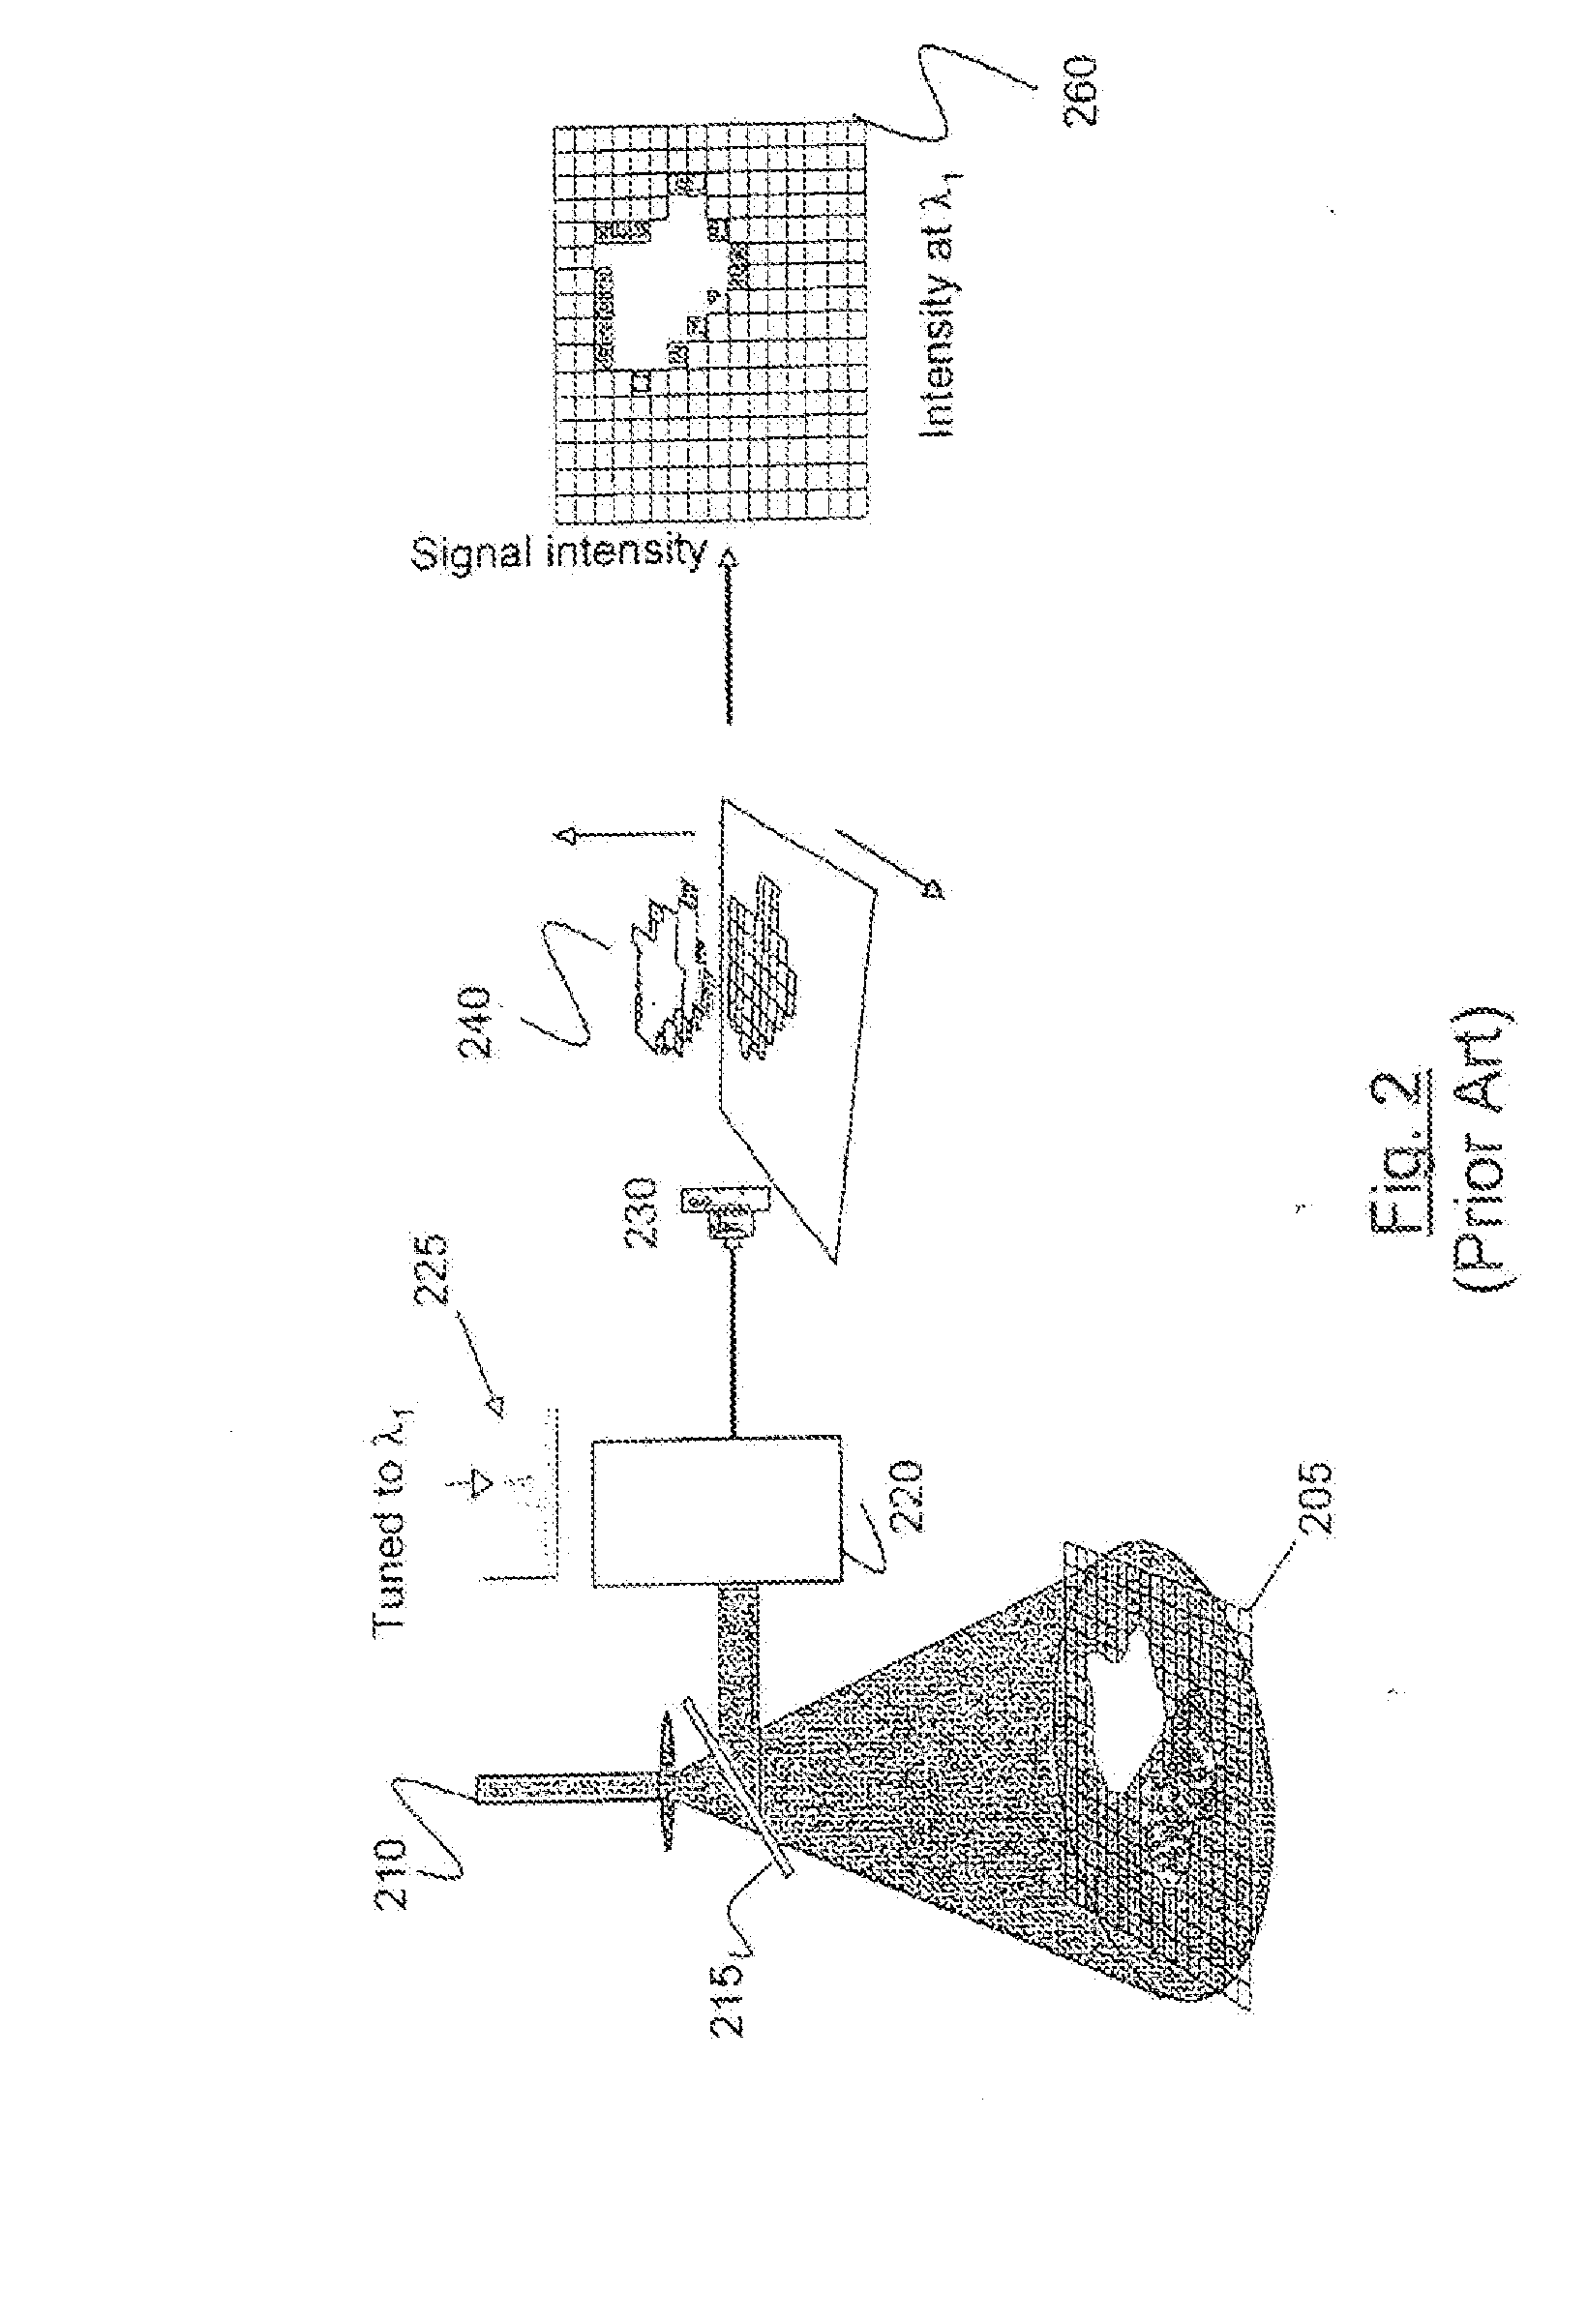 Method and Apparatus for Compact Spectrometer for Multipoint Sampling of an Object